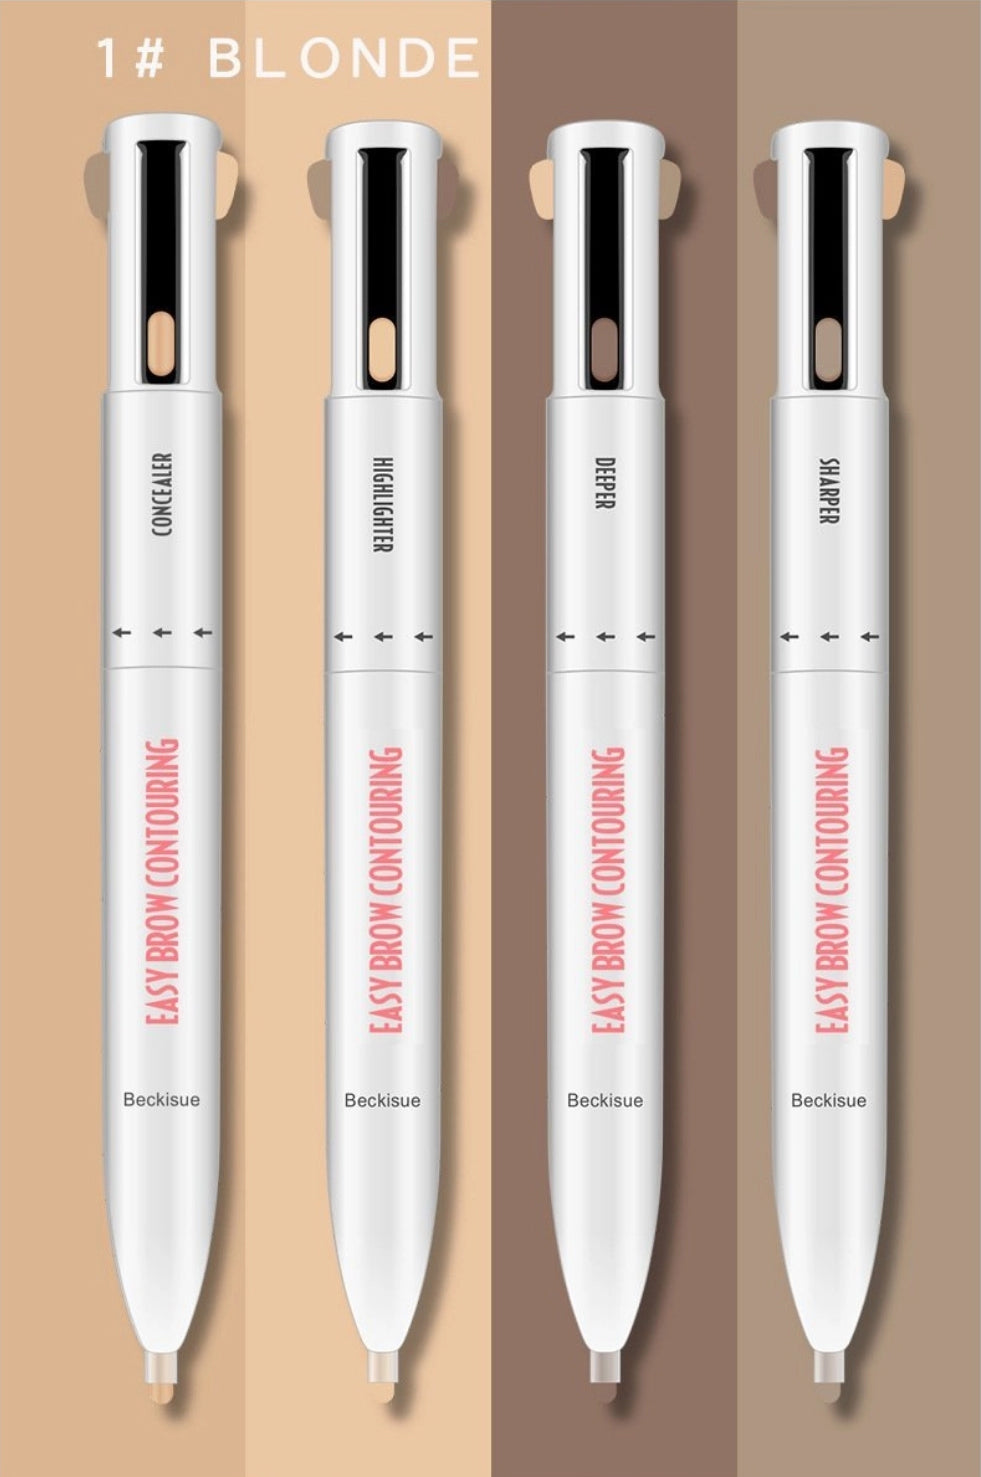 REVOLUTIONARY 4-IN-1 HIGHLIGHT & CONTOUR PEN - UP TO 50% OFF LAST DAY PROMOTION!